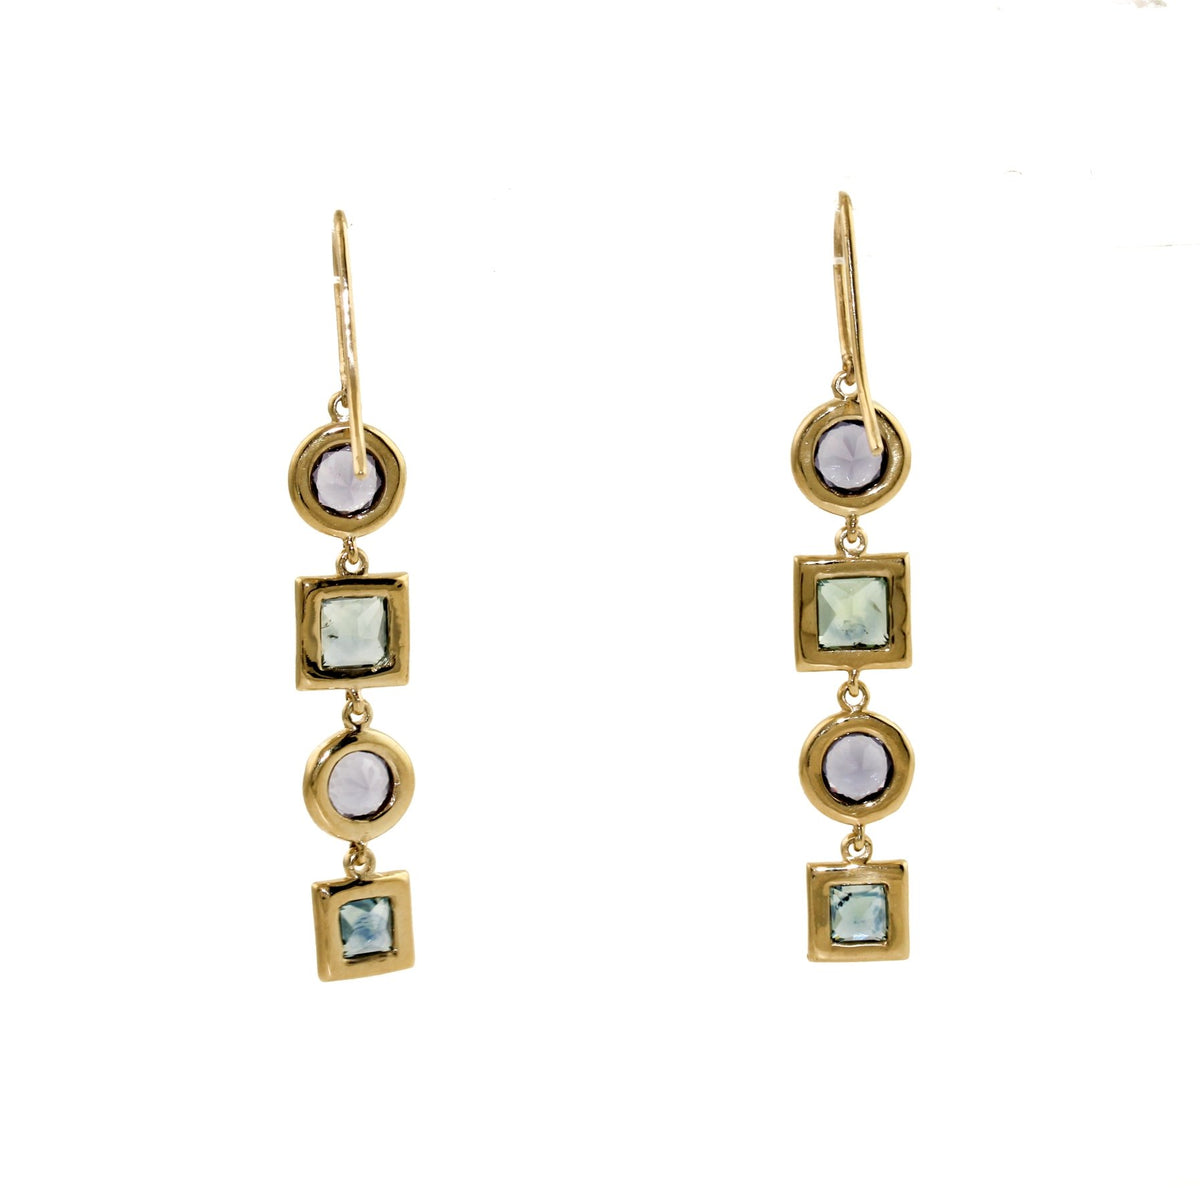 The Camille Sapphire Earrings - Kingdom Jewelry